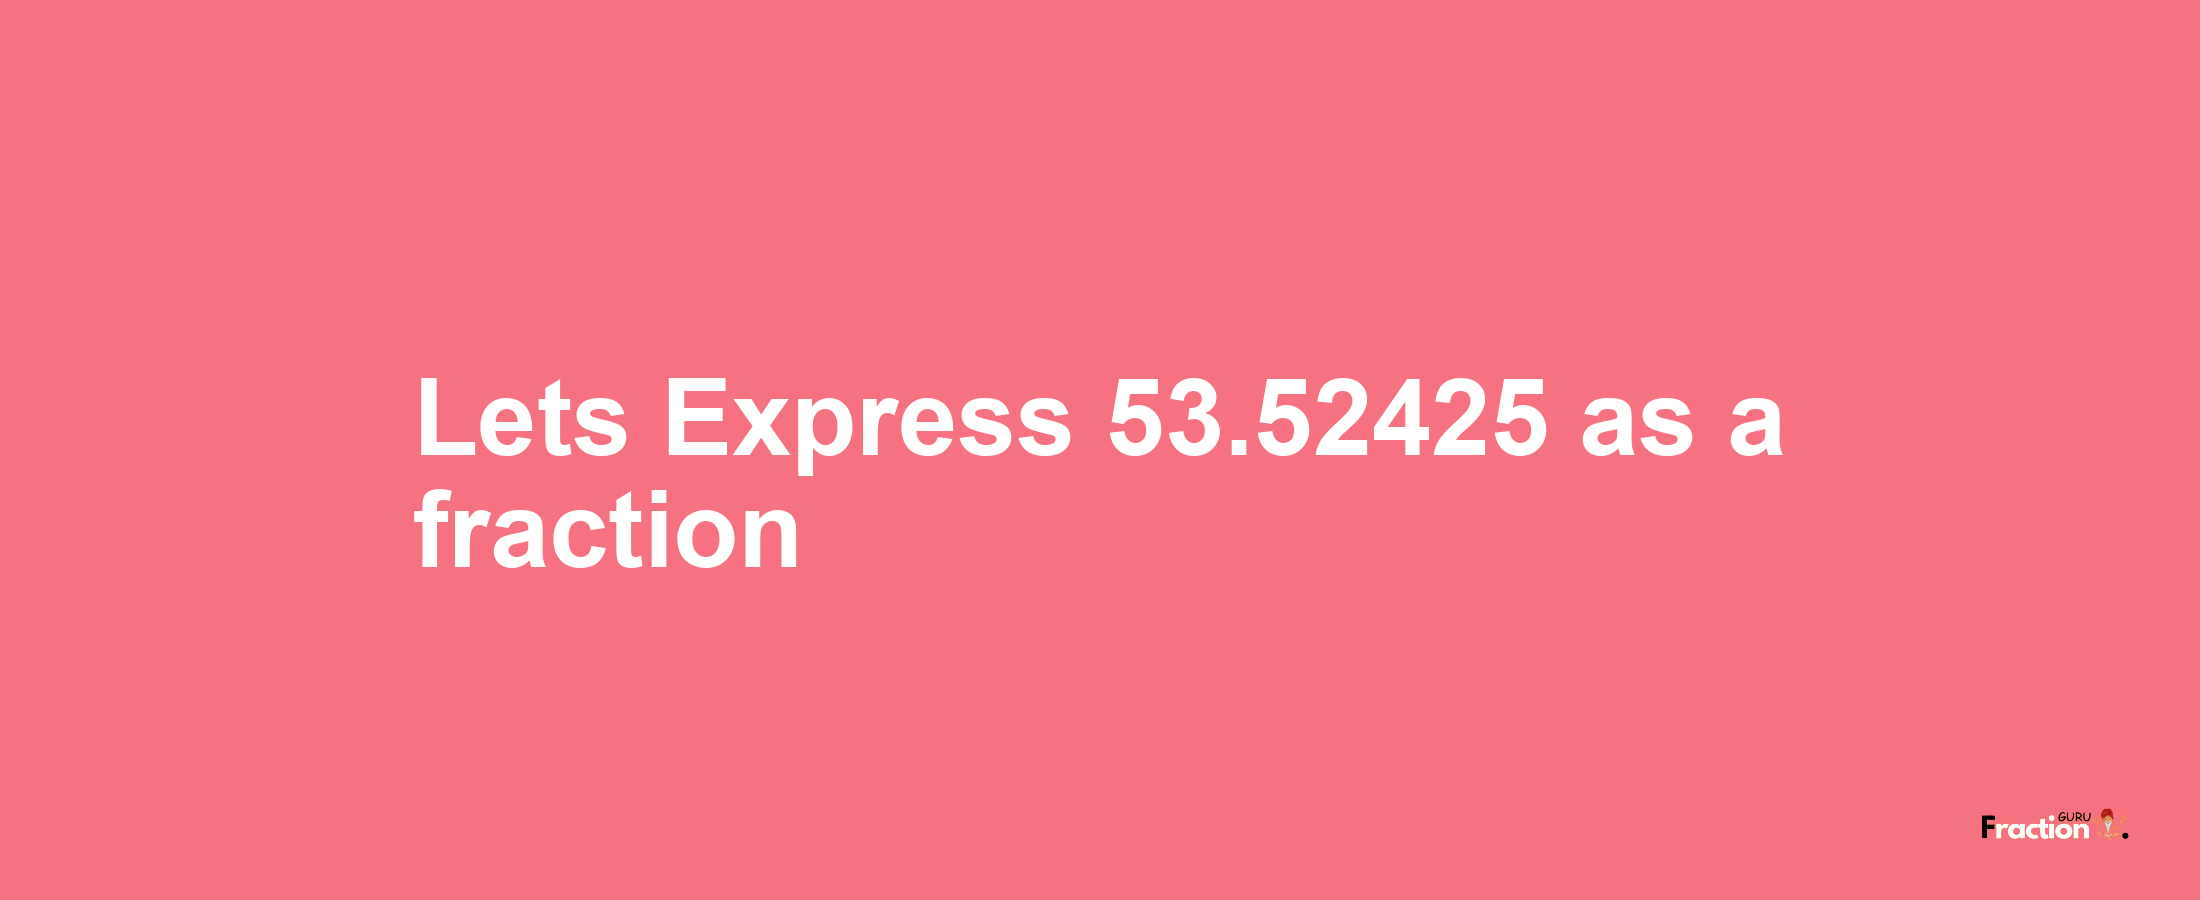 Lets Express 53.52425 as afraction